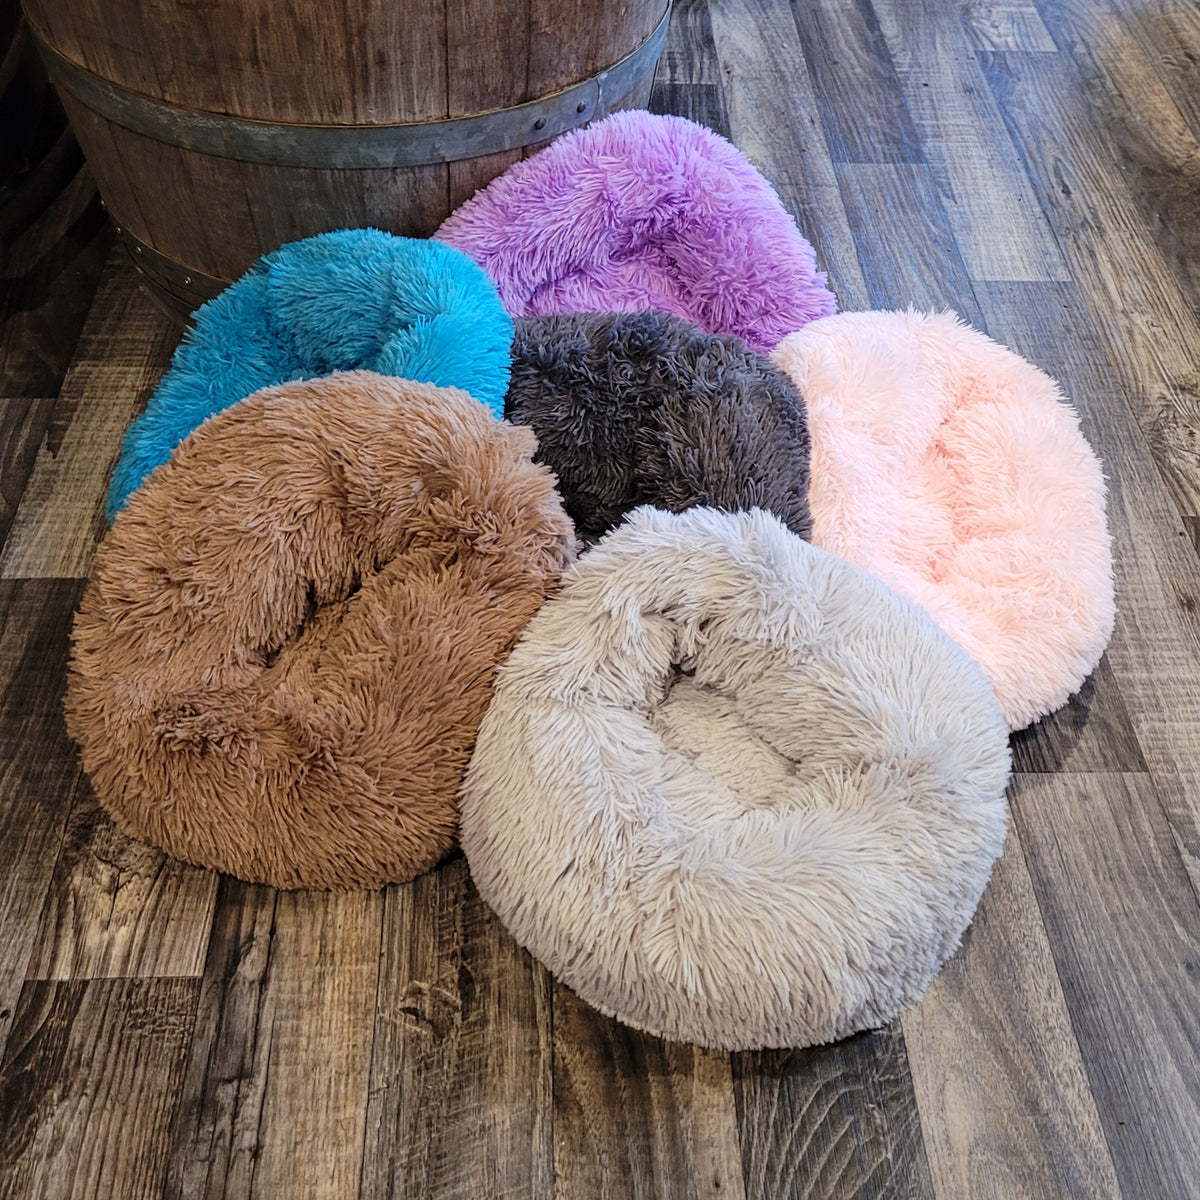 colorful calming donut pet bed dogs cats puppies kittens fluffy soft blue purple pink grey brown 16" 40cm for anxiety